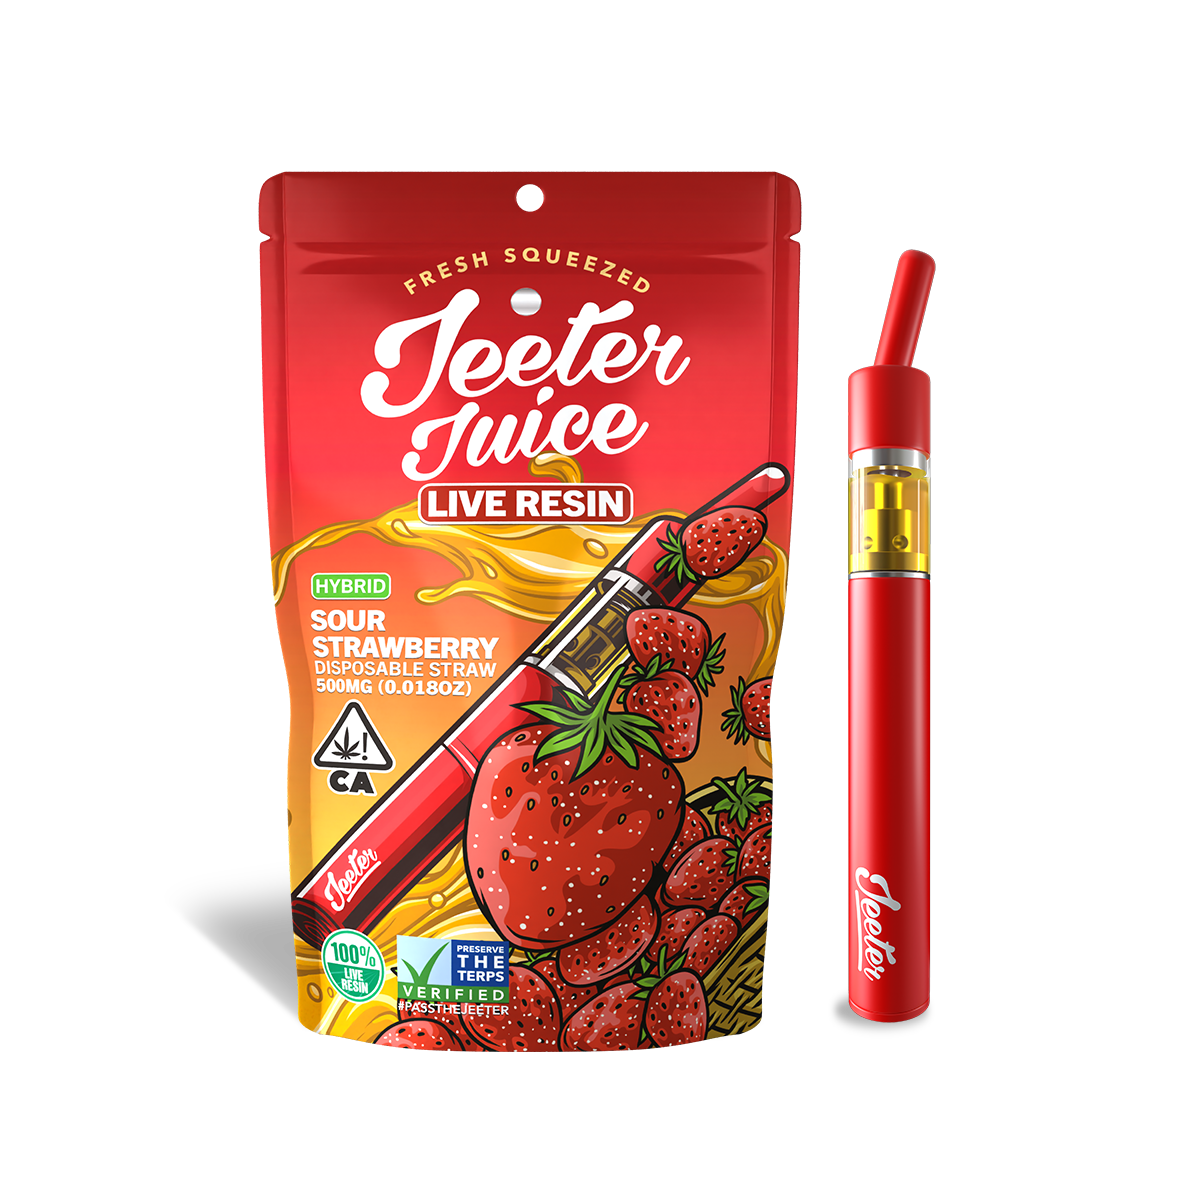 Jeeter Juice Disposable 500ml Live Resin Straw - Sour Strawberry - The Balloon Room